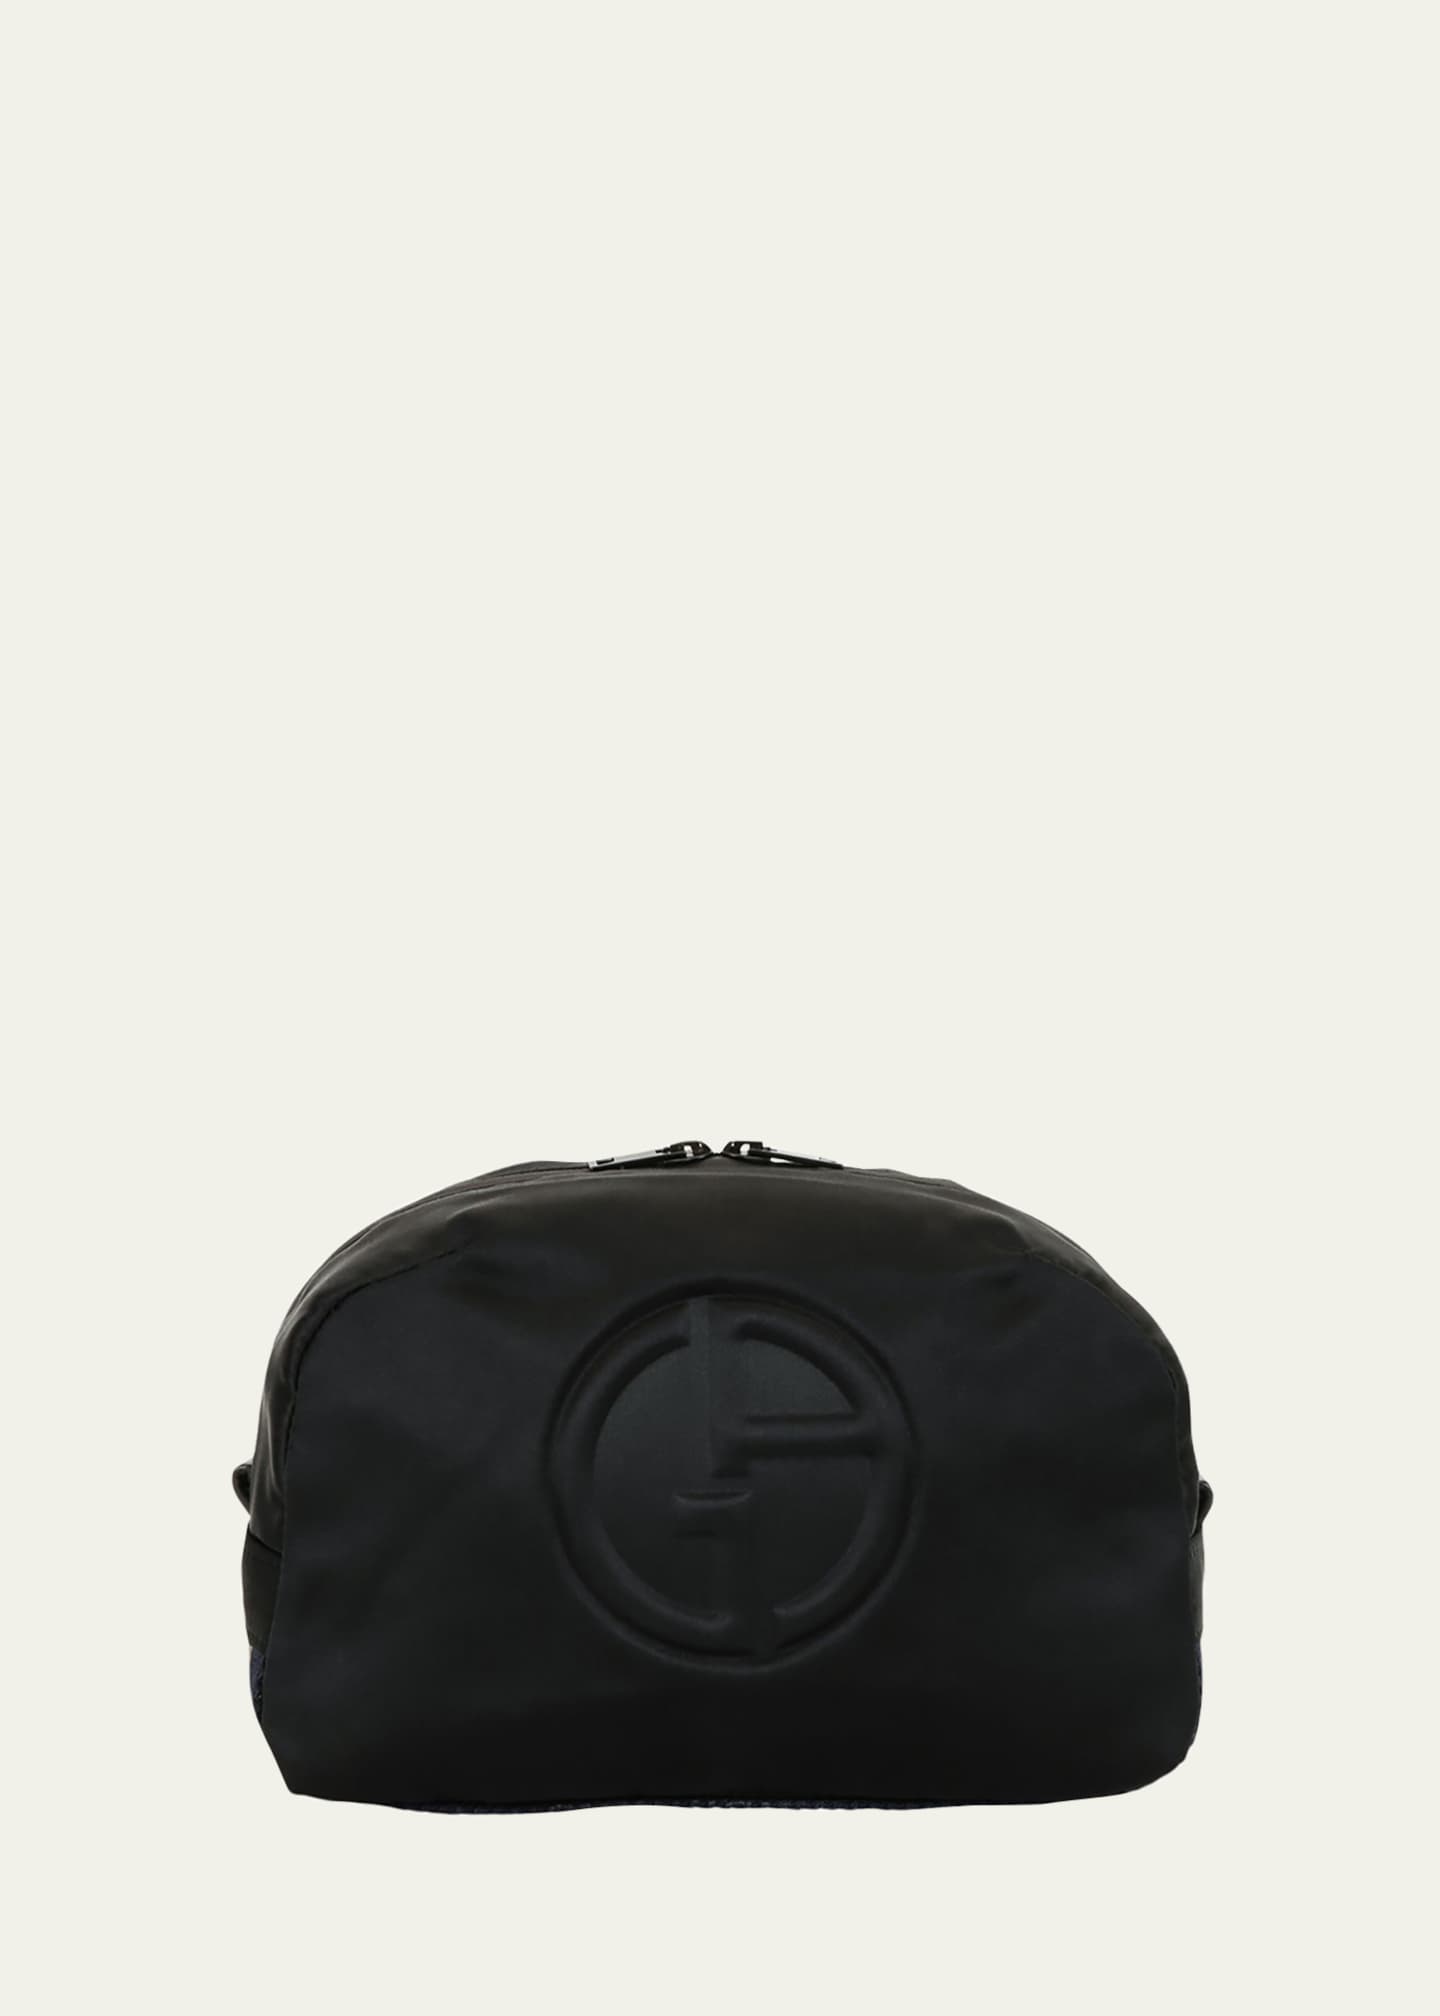 Gucci Men's Logo-Debossed Leather Pouch